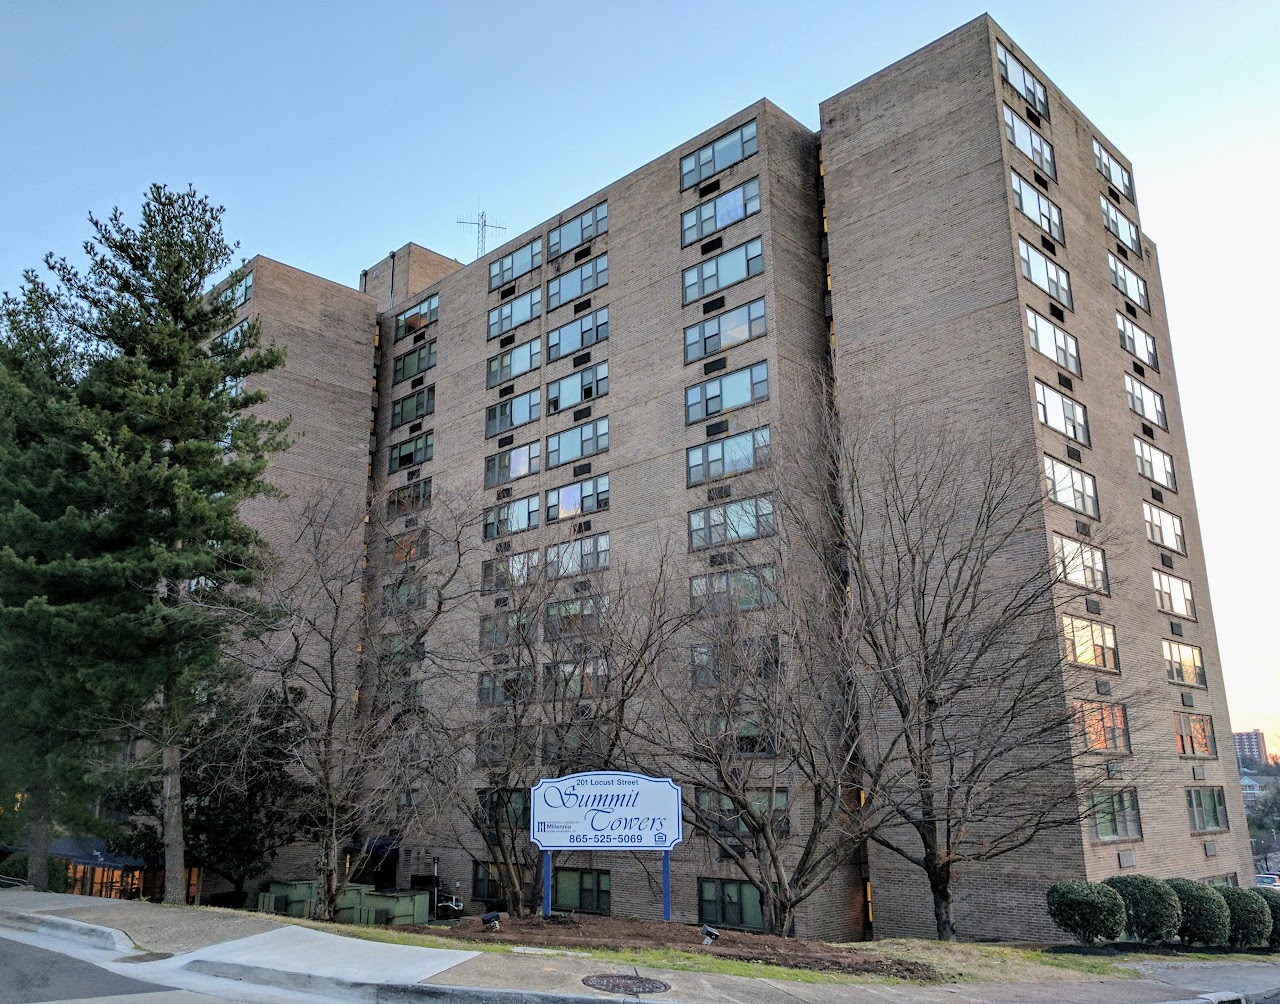 Photo of SUMMIT TOWERS. Affordable housing located at 201 LOCUST ST KNOXVILLE, TN 37902